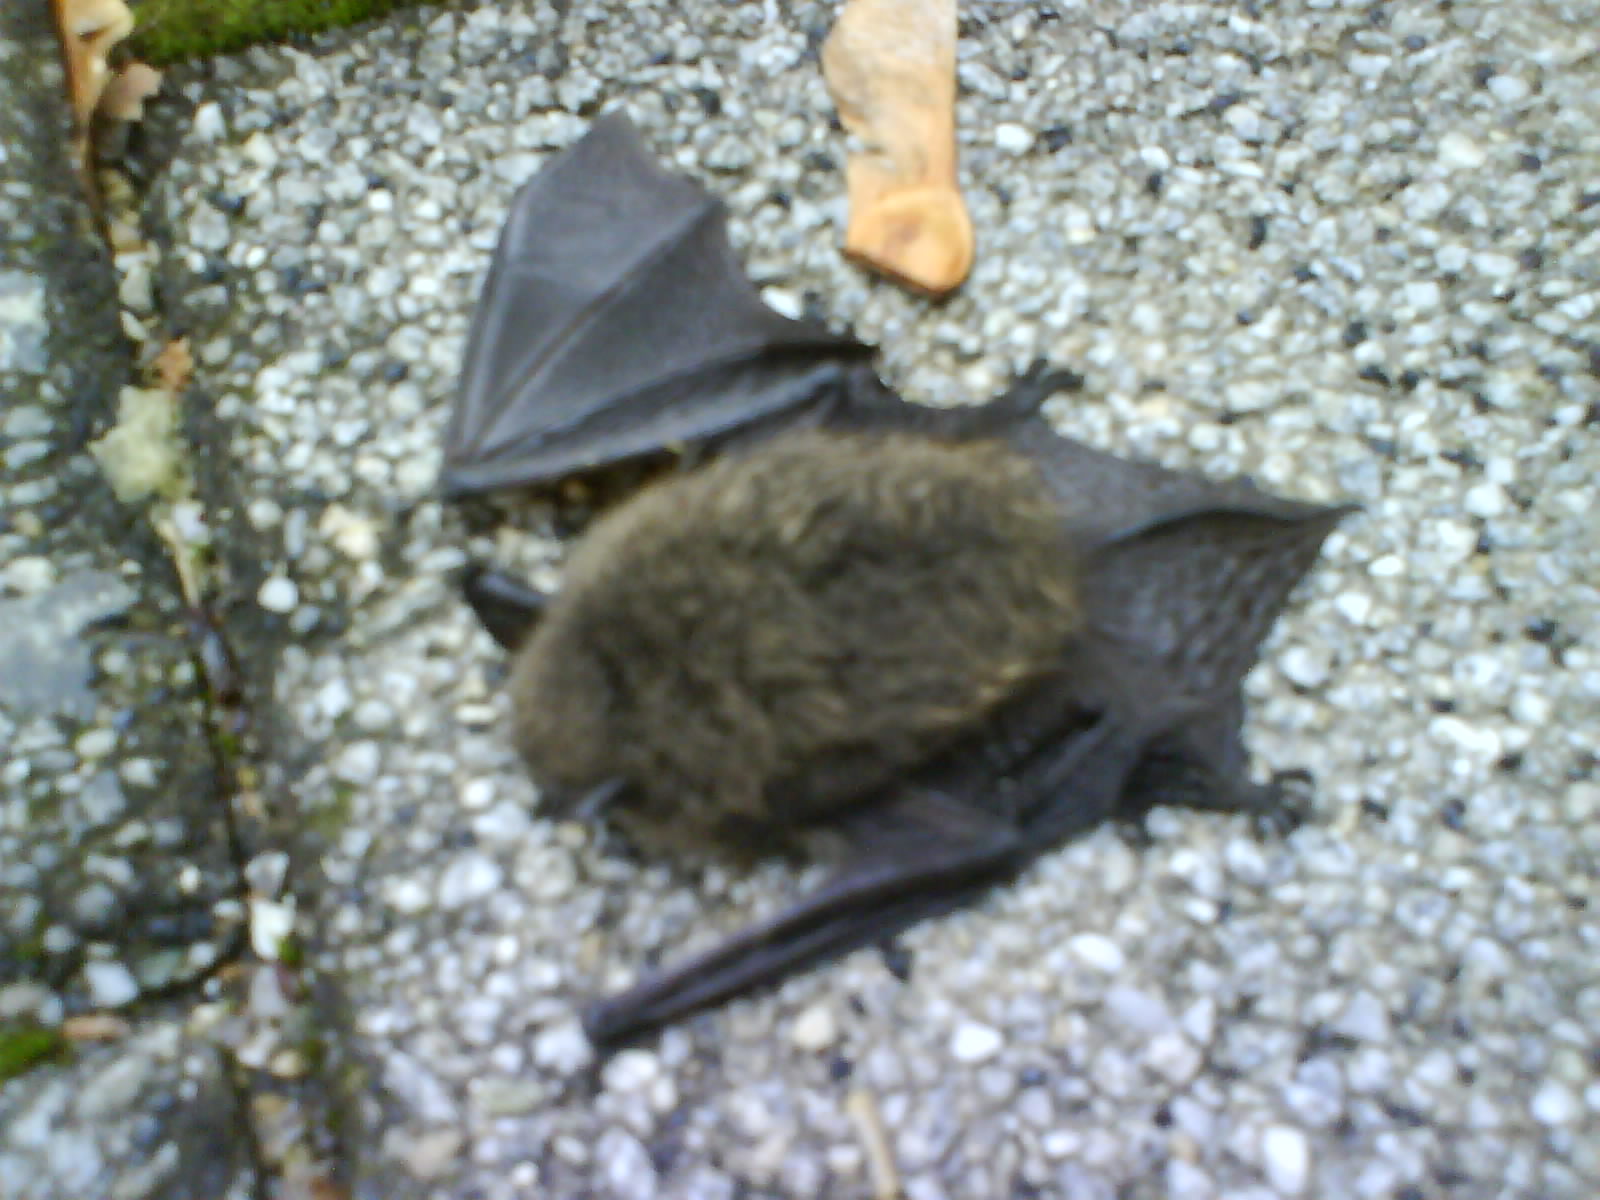 a small brown bat is on the ground